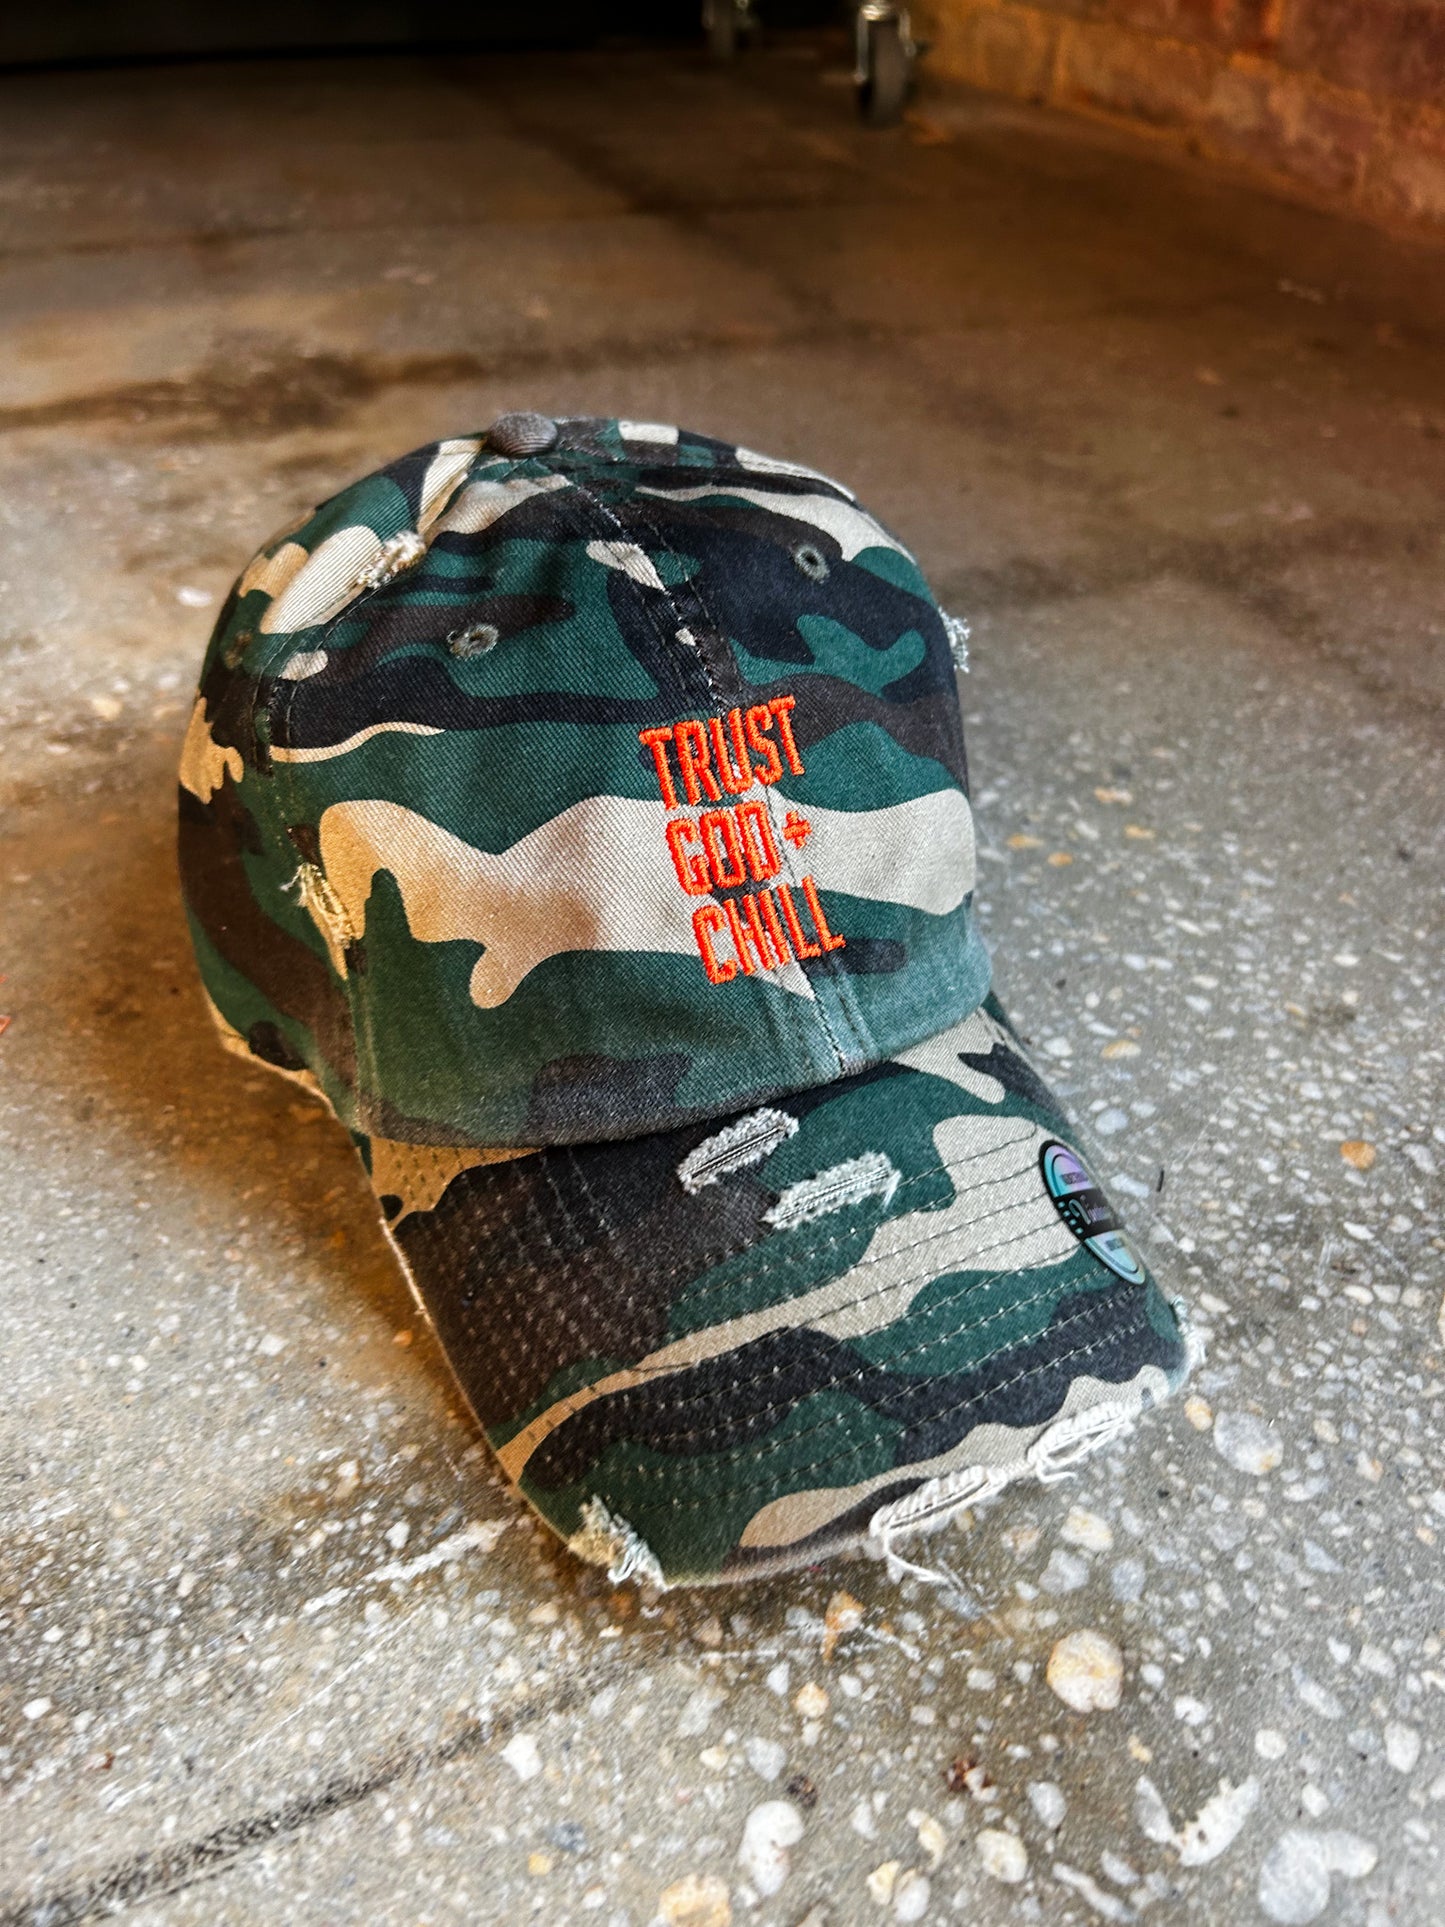 Trust God and Chill Hat (Distressed)